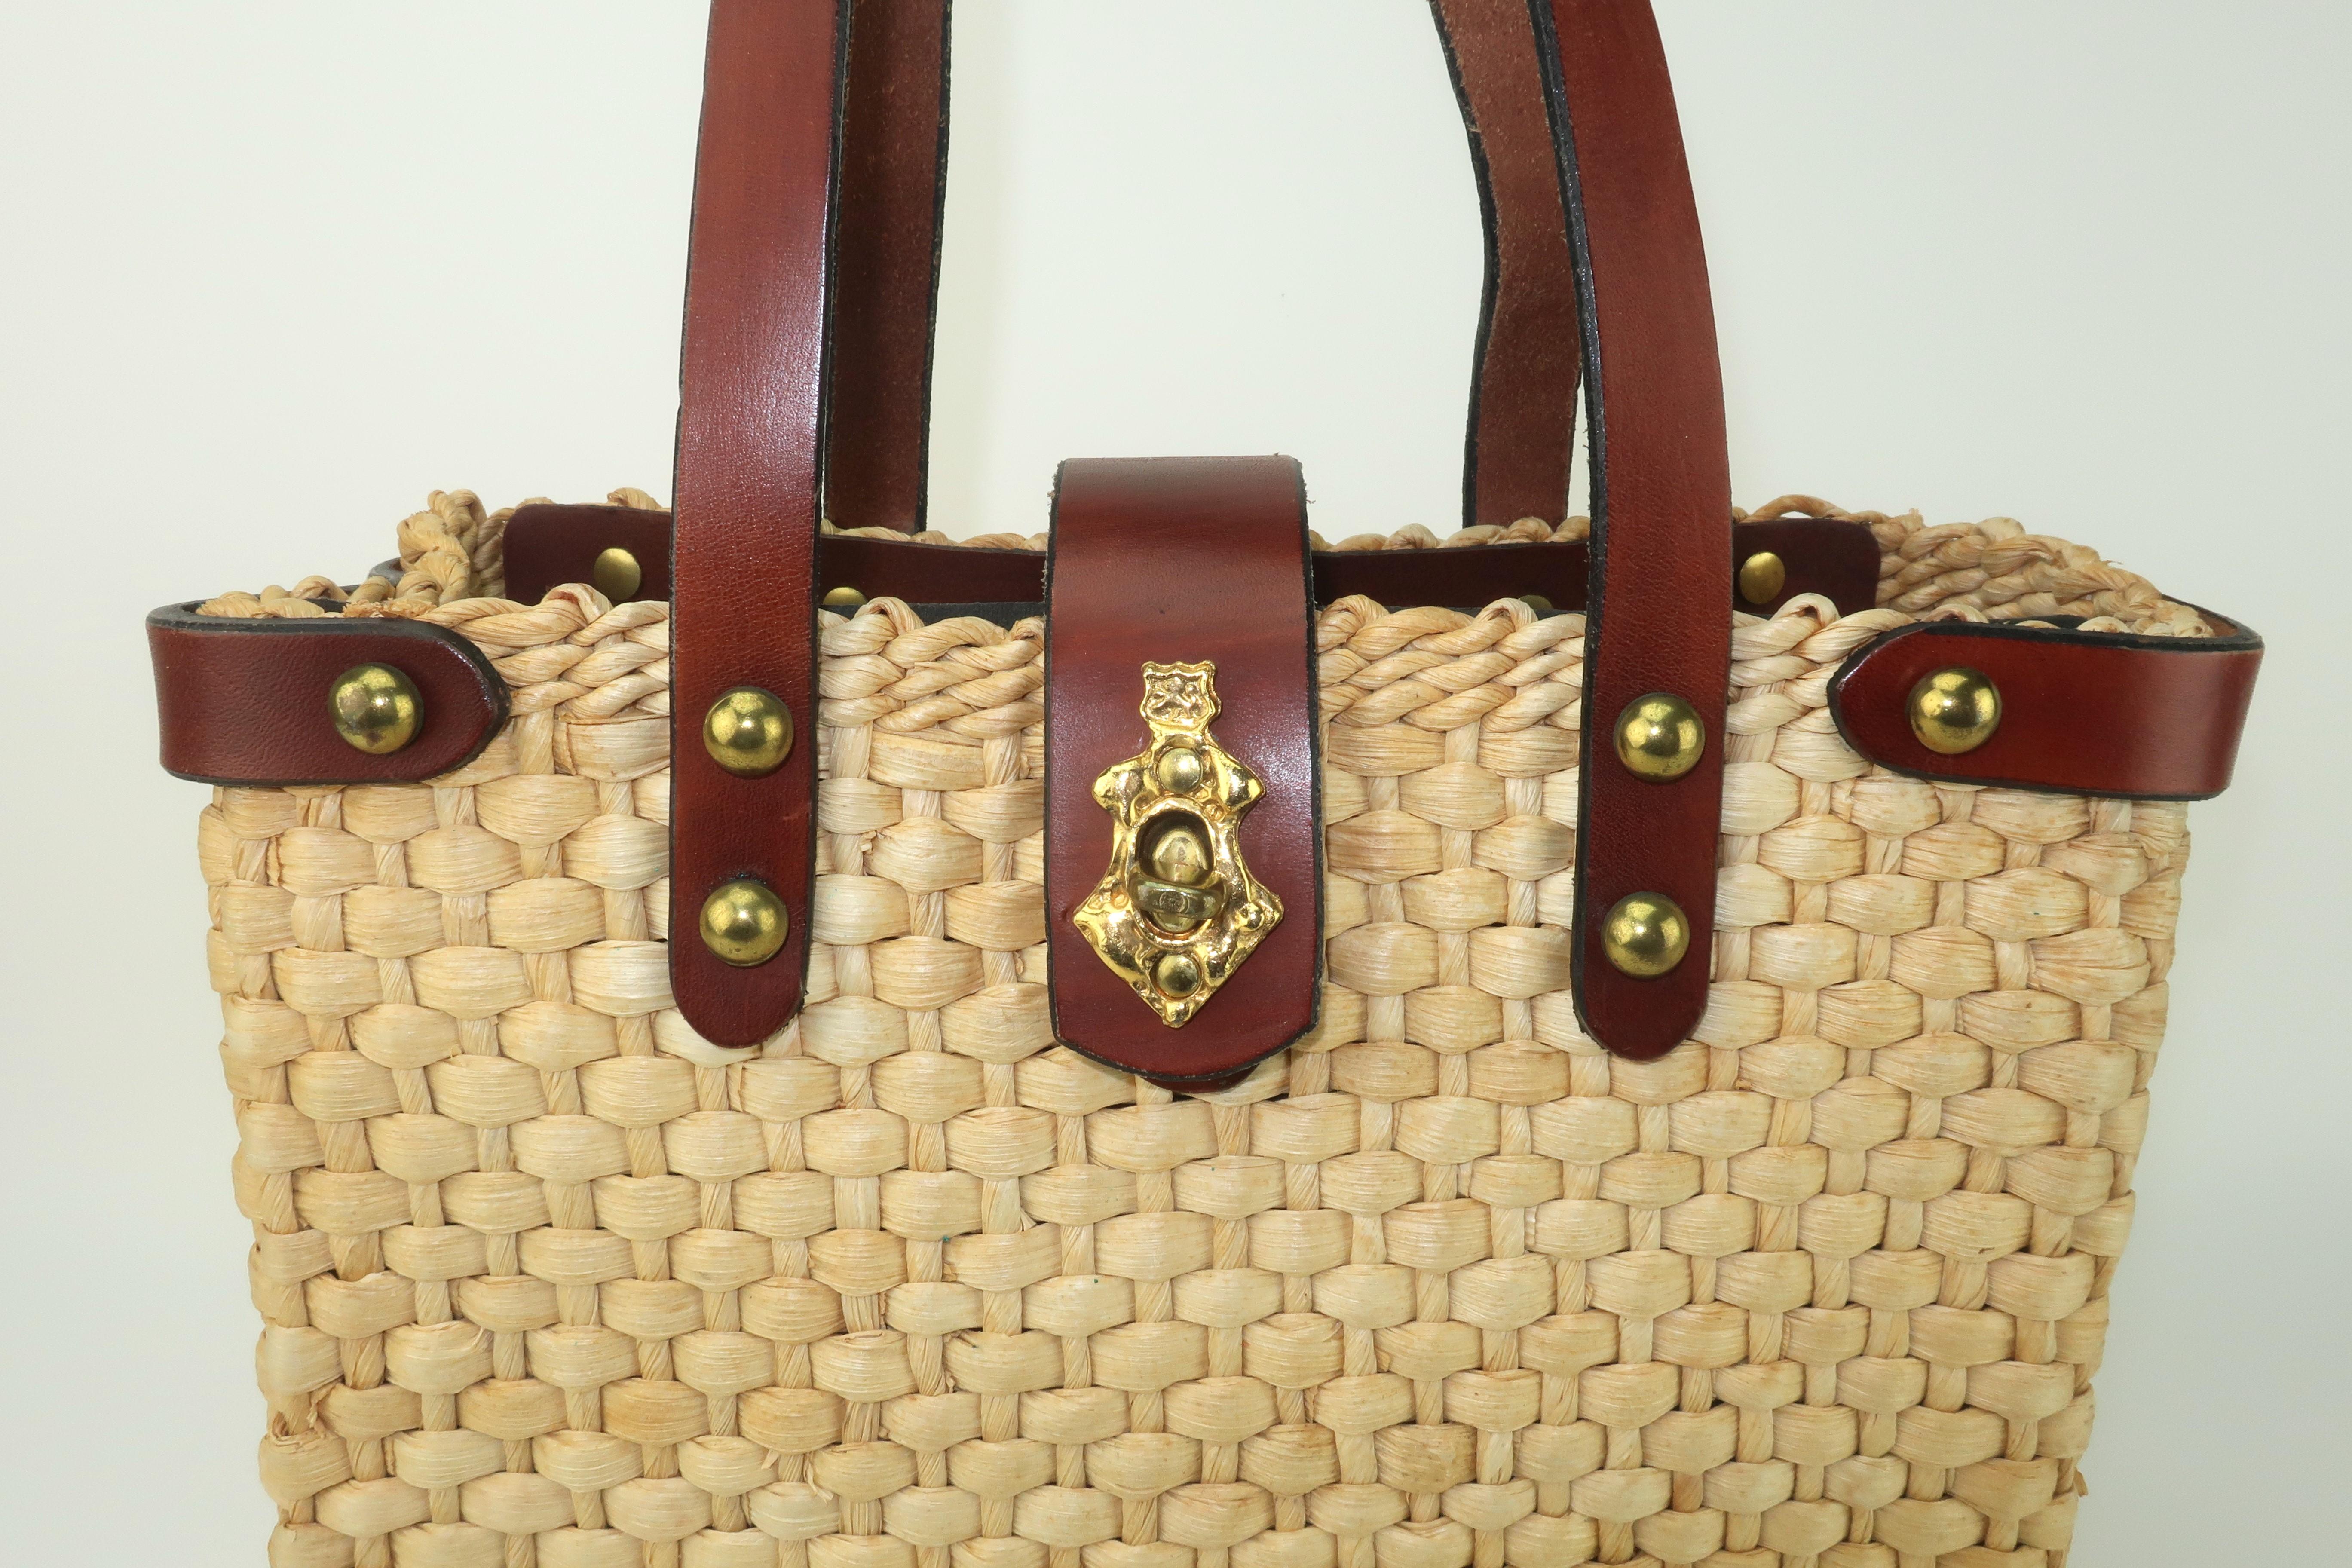 John Romain handbags are an American classic.  In the 1960's and 1970's, the iconic tweed and leather designs were on the arms of preppy coeds from coast to coast.  This straw tote handbag was designed as part of a late 1960's collection to